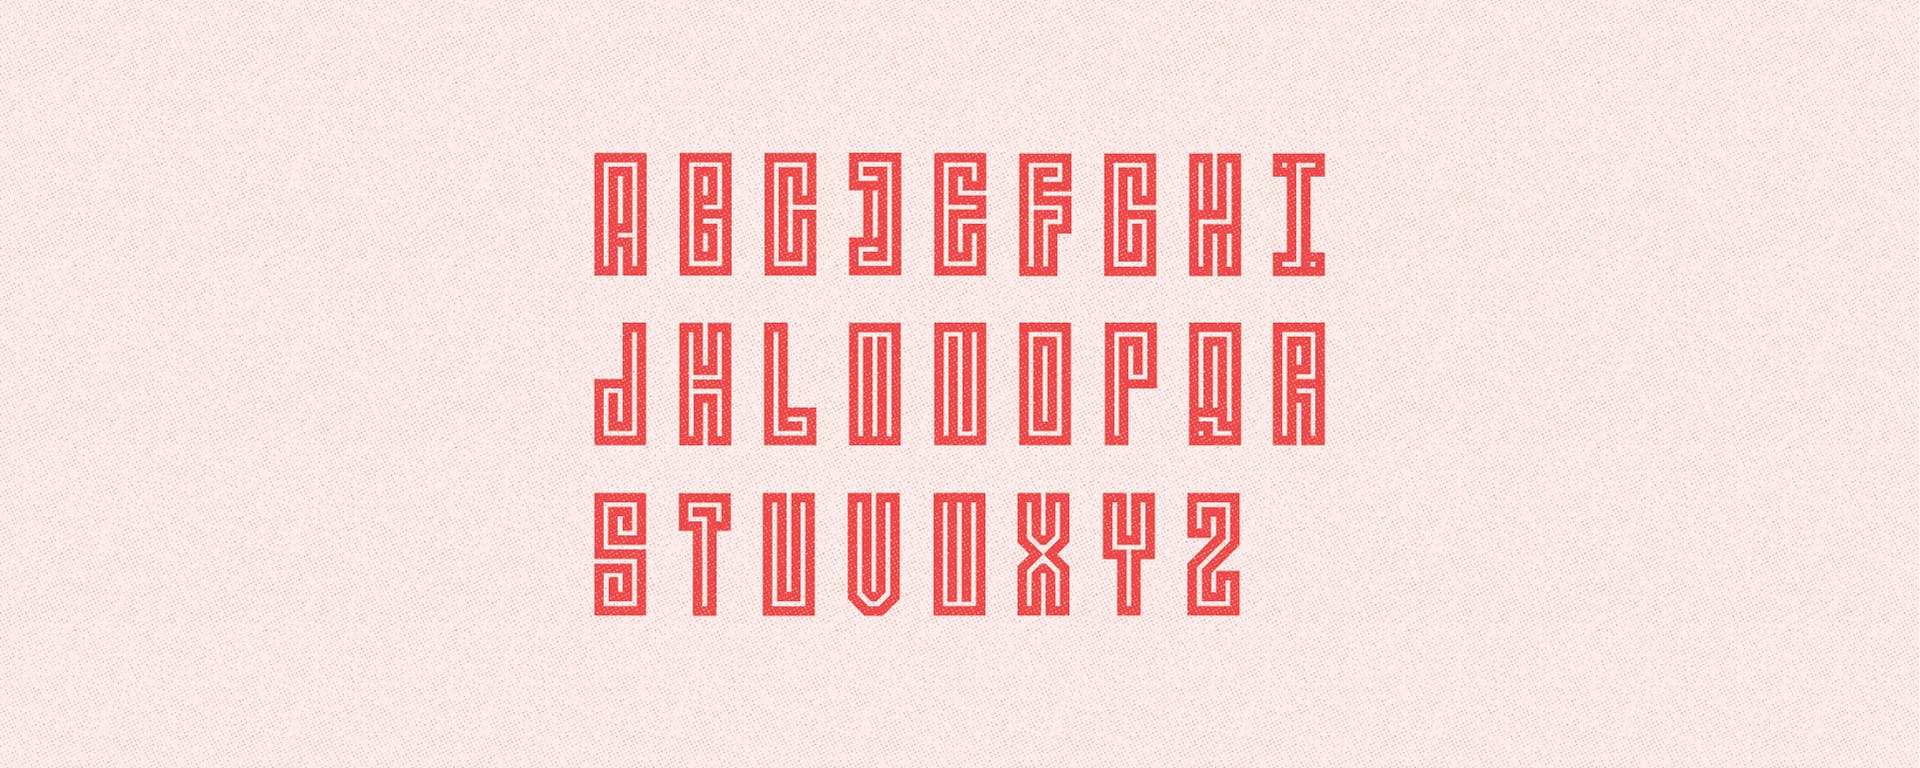 We created a font modeled after decorative borders—the kind you’d find on a saimin bowl.